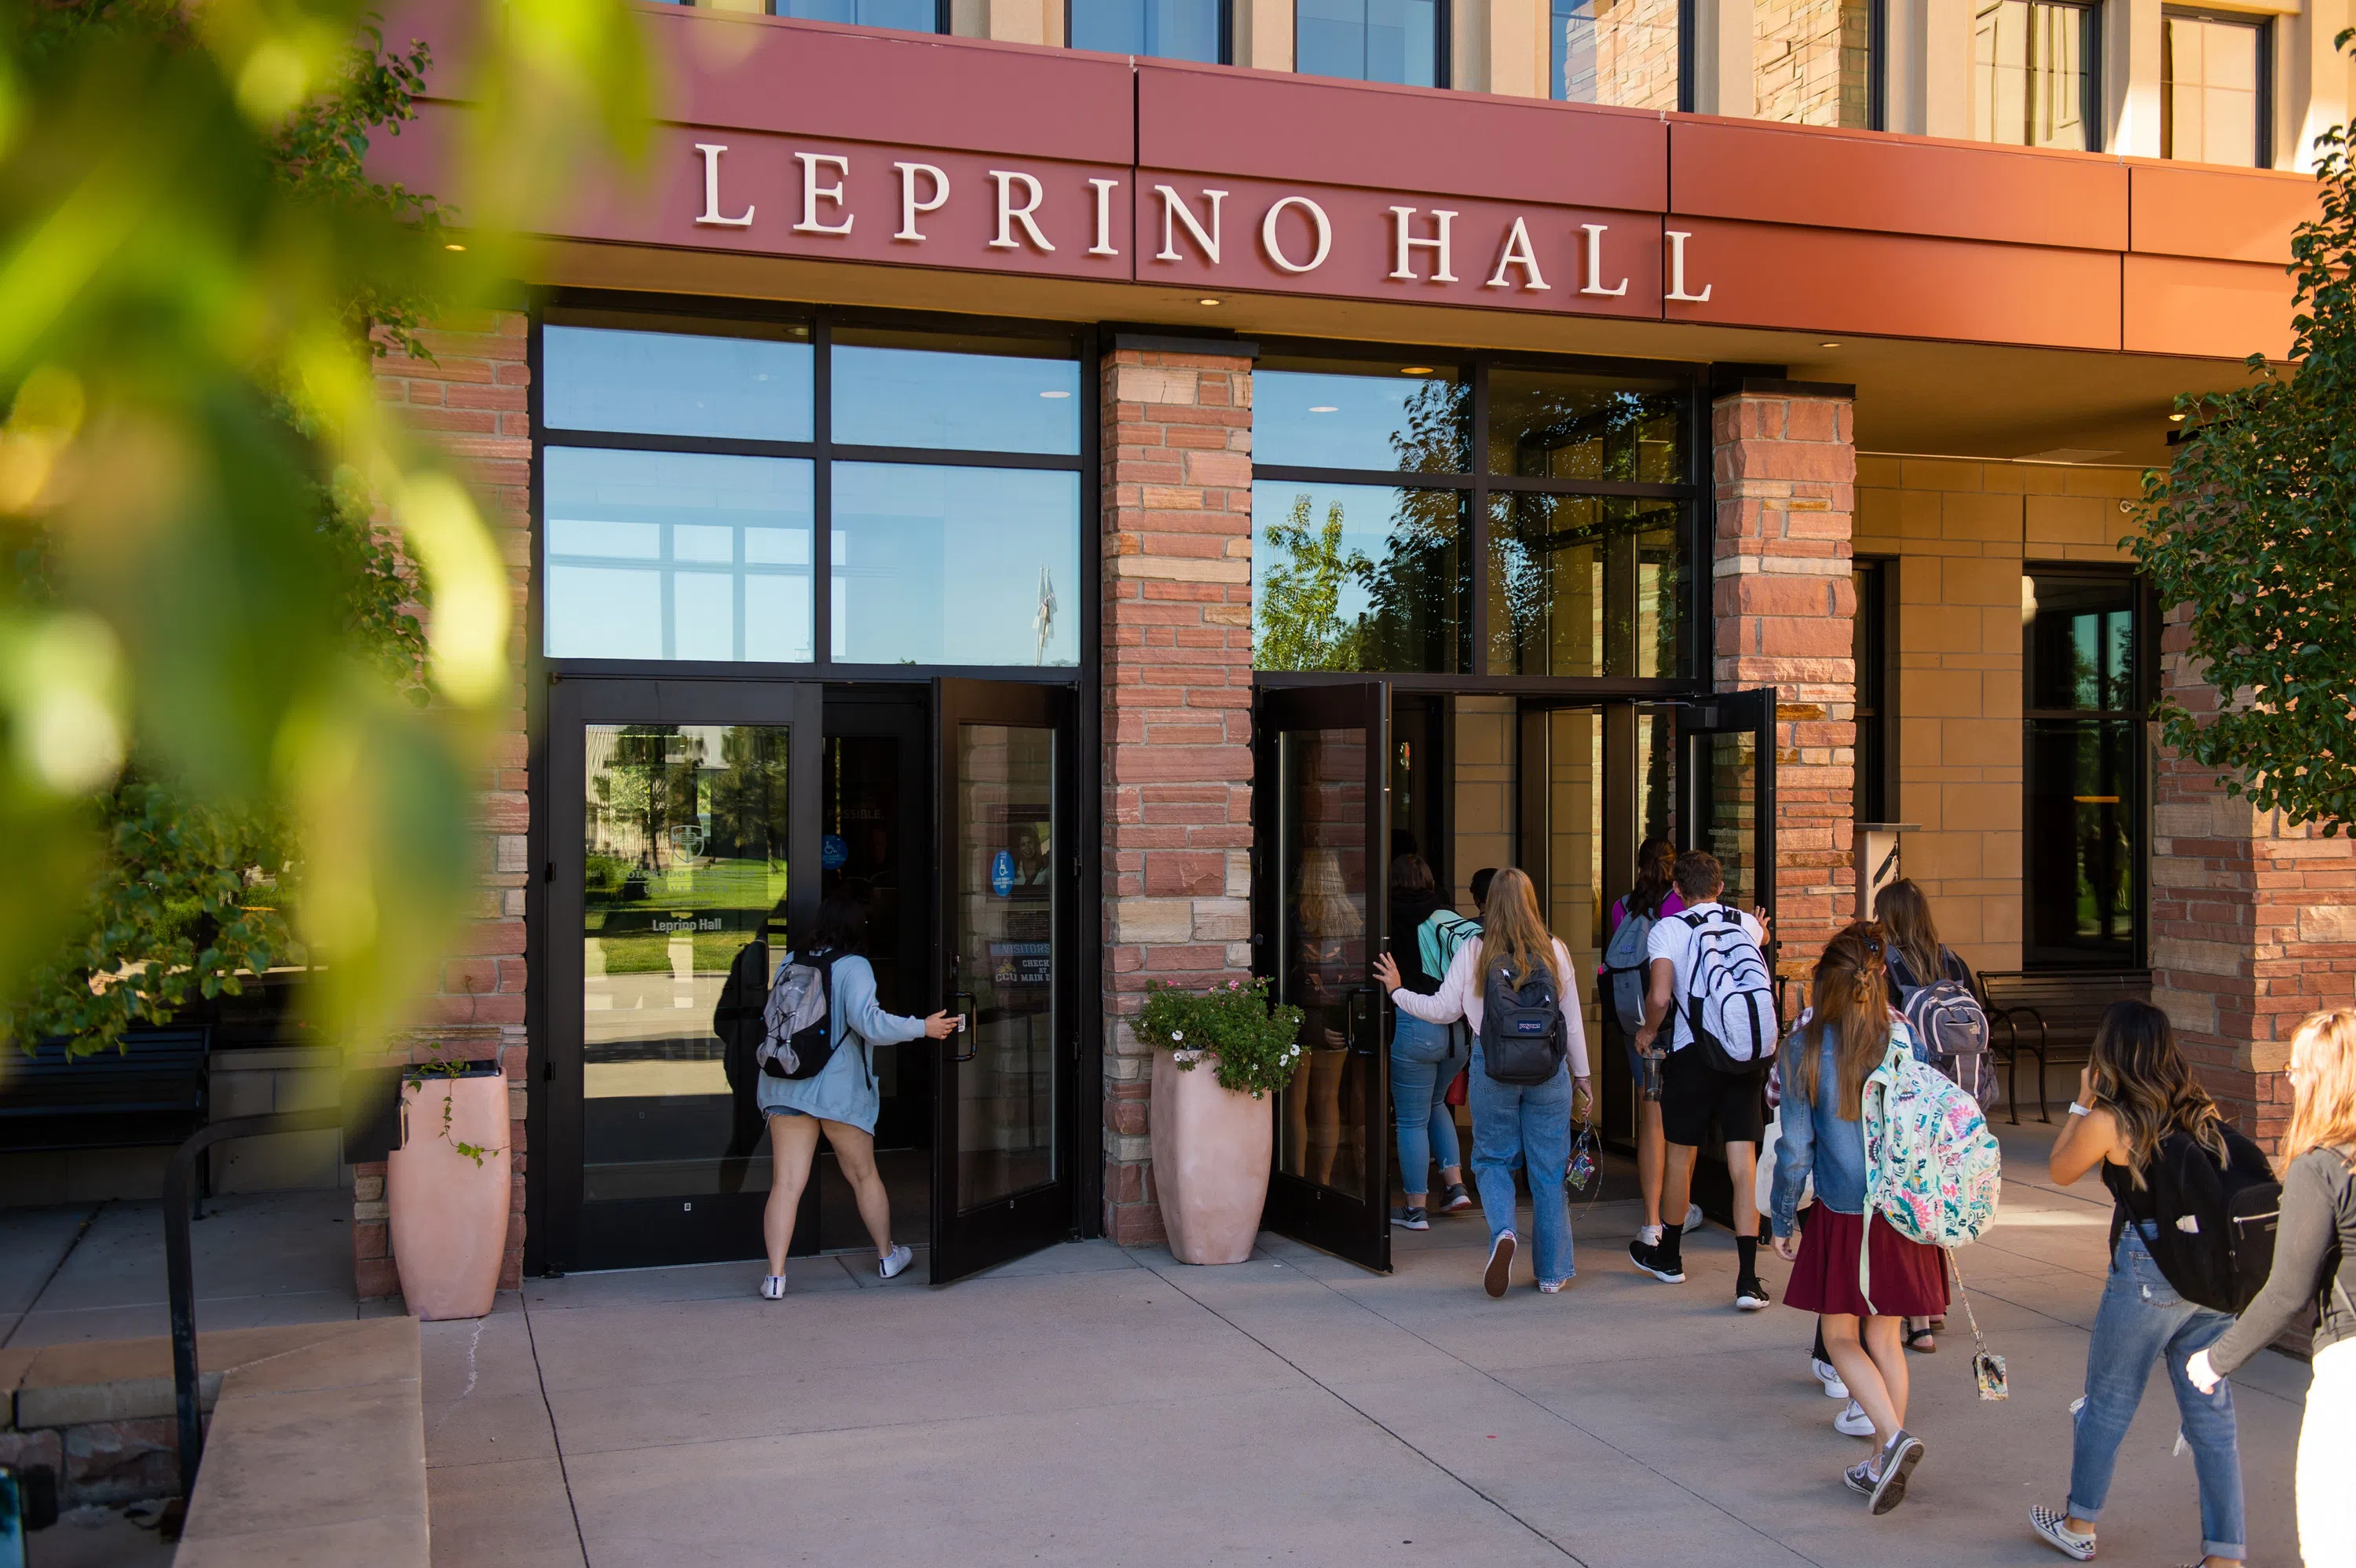 Students walking in the two sets of double doors at Leprino Hall